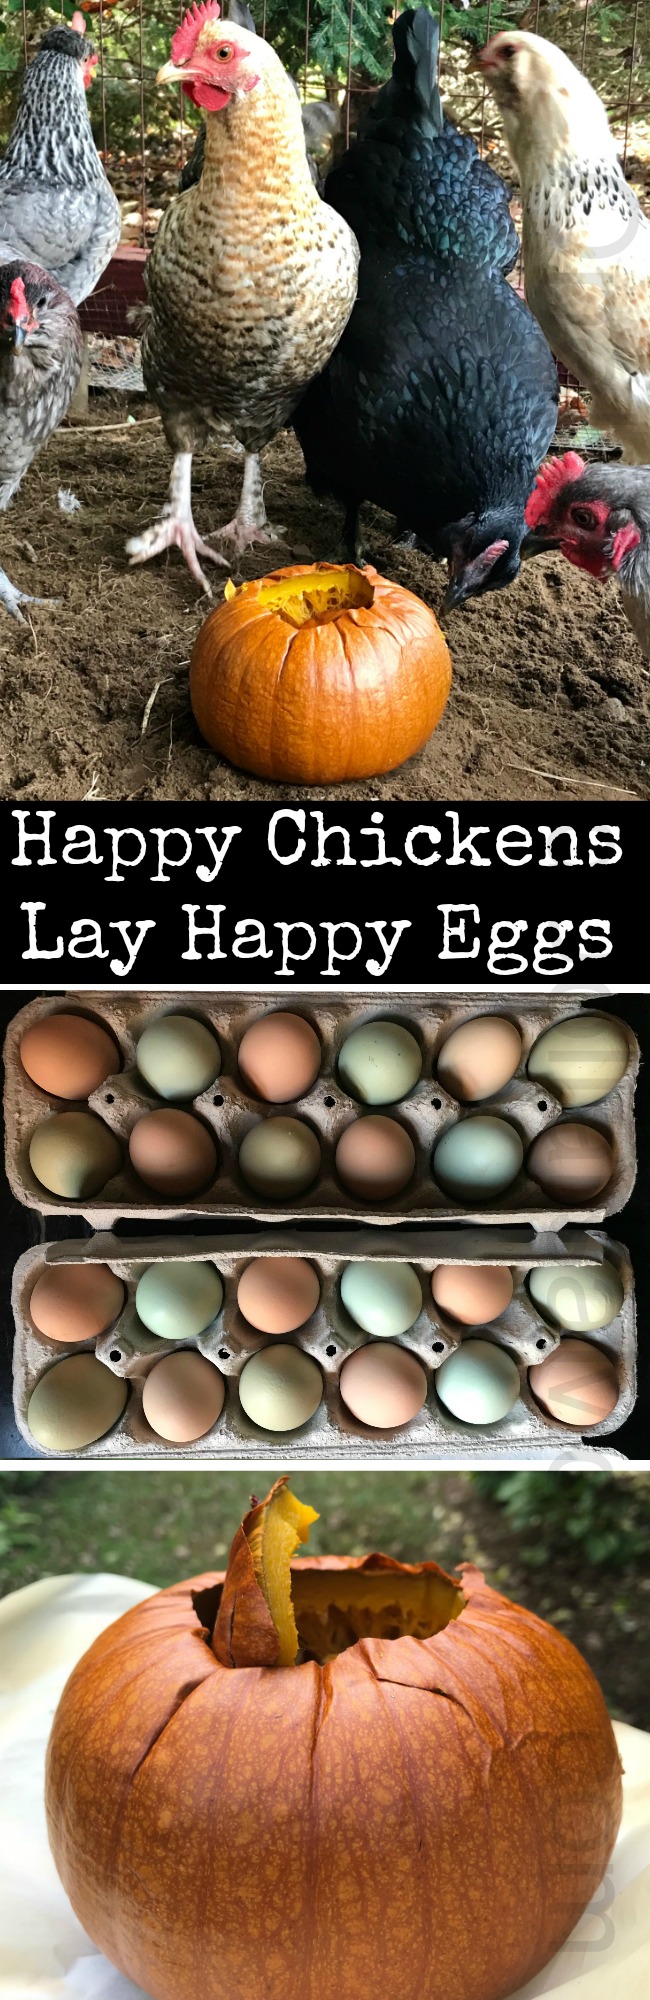 Gardening in New England – What’s Still Growing in Our Garden, Fresh Eggs, and Treats for the Chickens